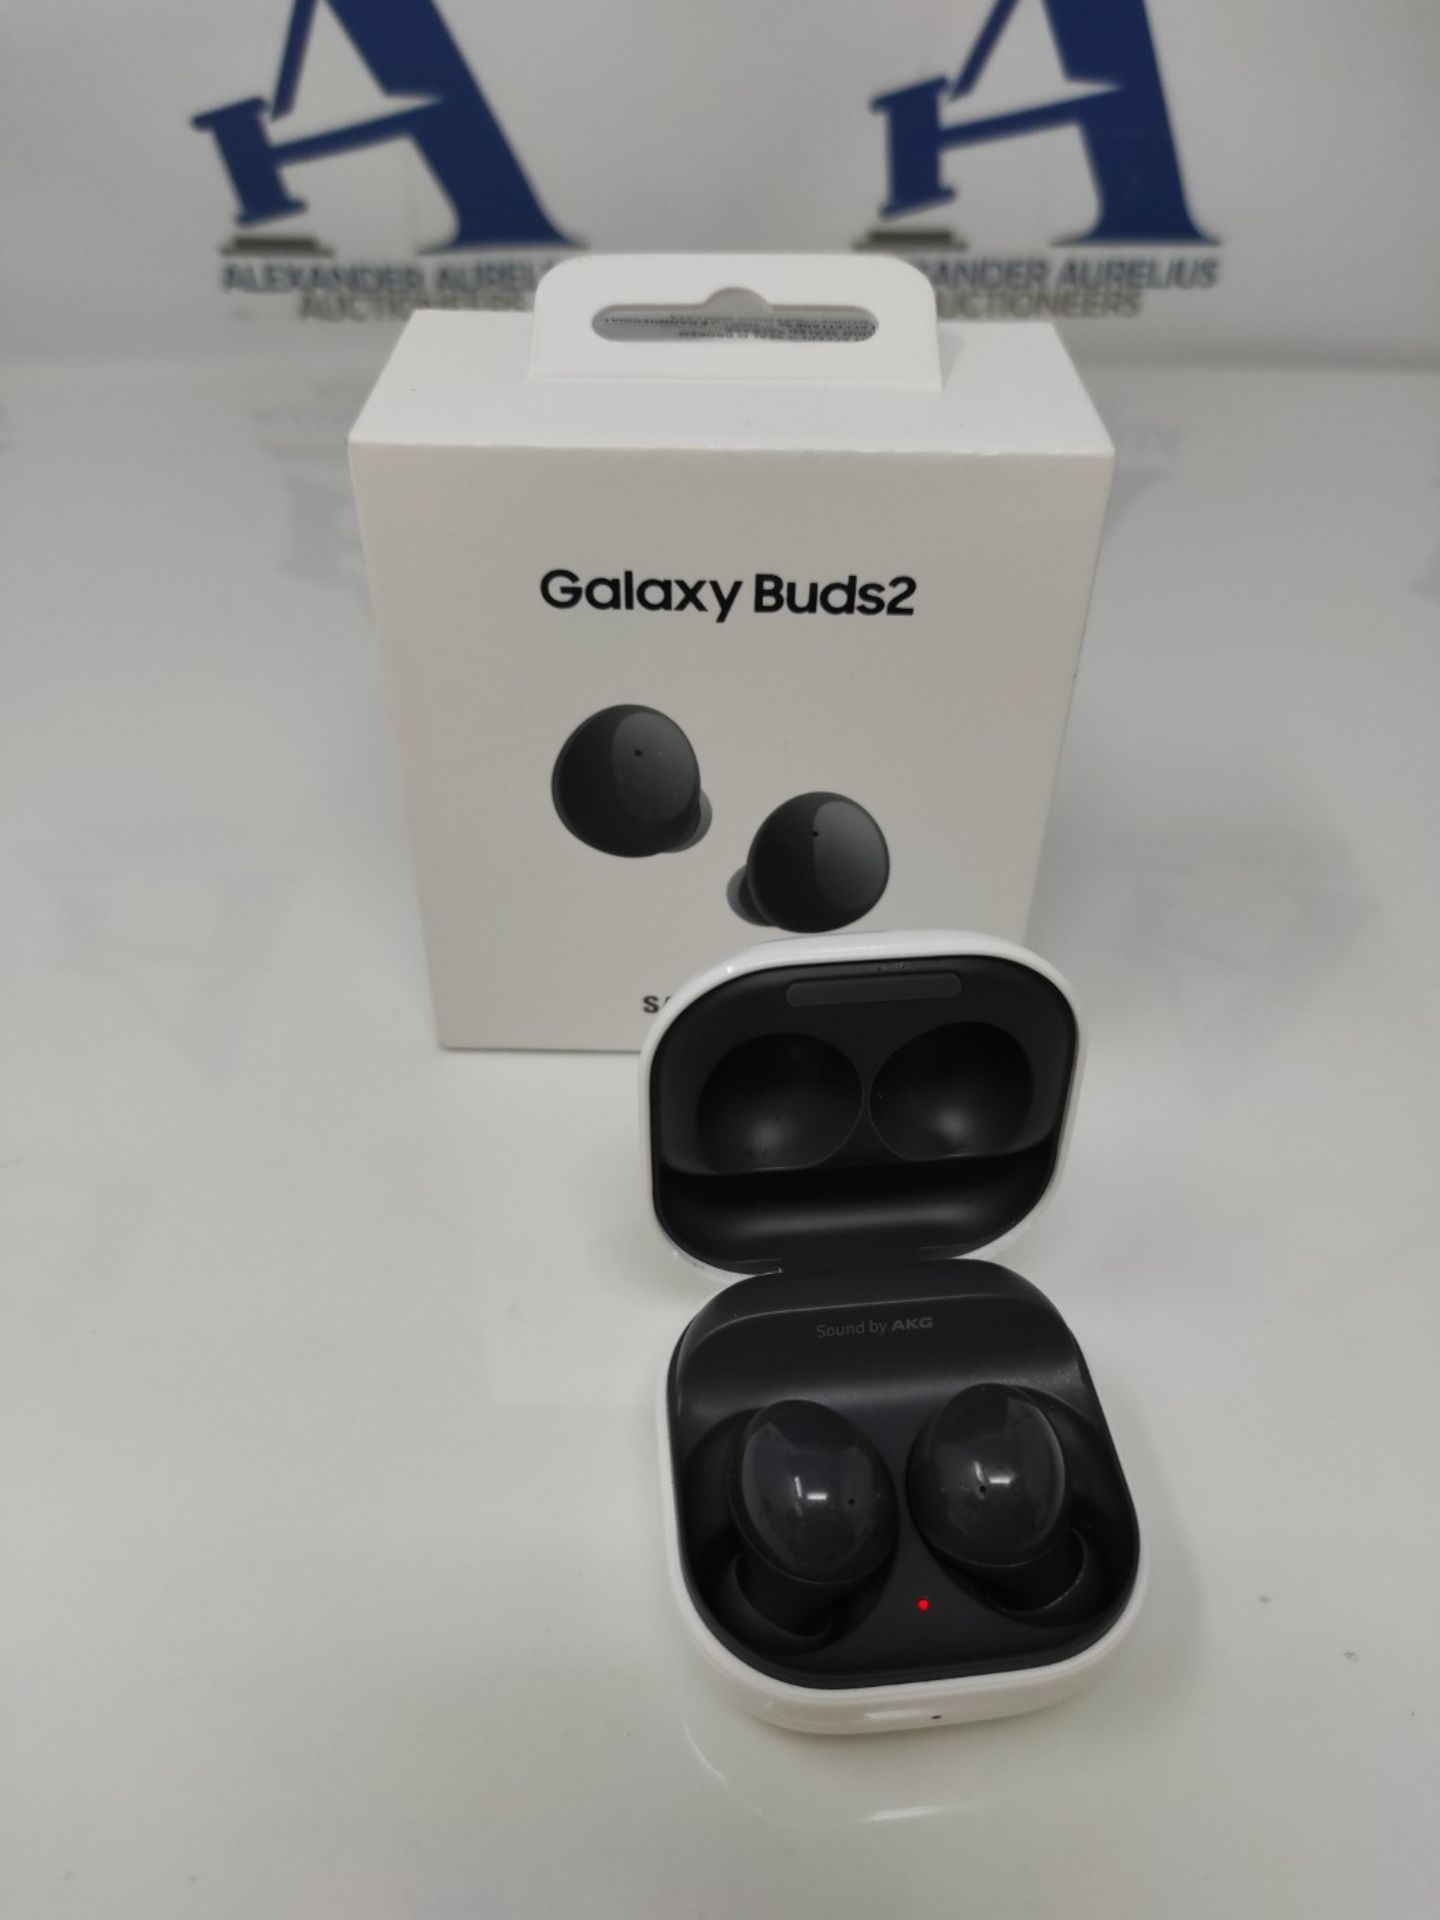 RRP £99.00 [INCOMPLETE] Samsung Galaxy Buds2 Wireless Earphones, Graphite (UK Version) - Image 2 of 3